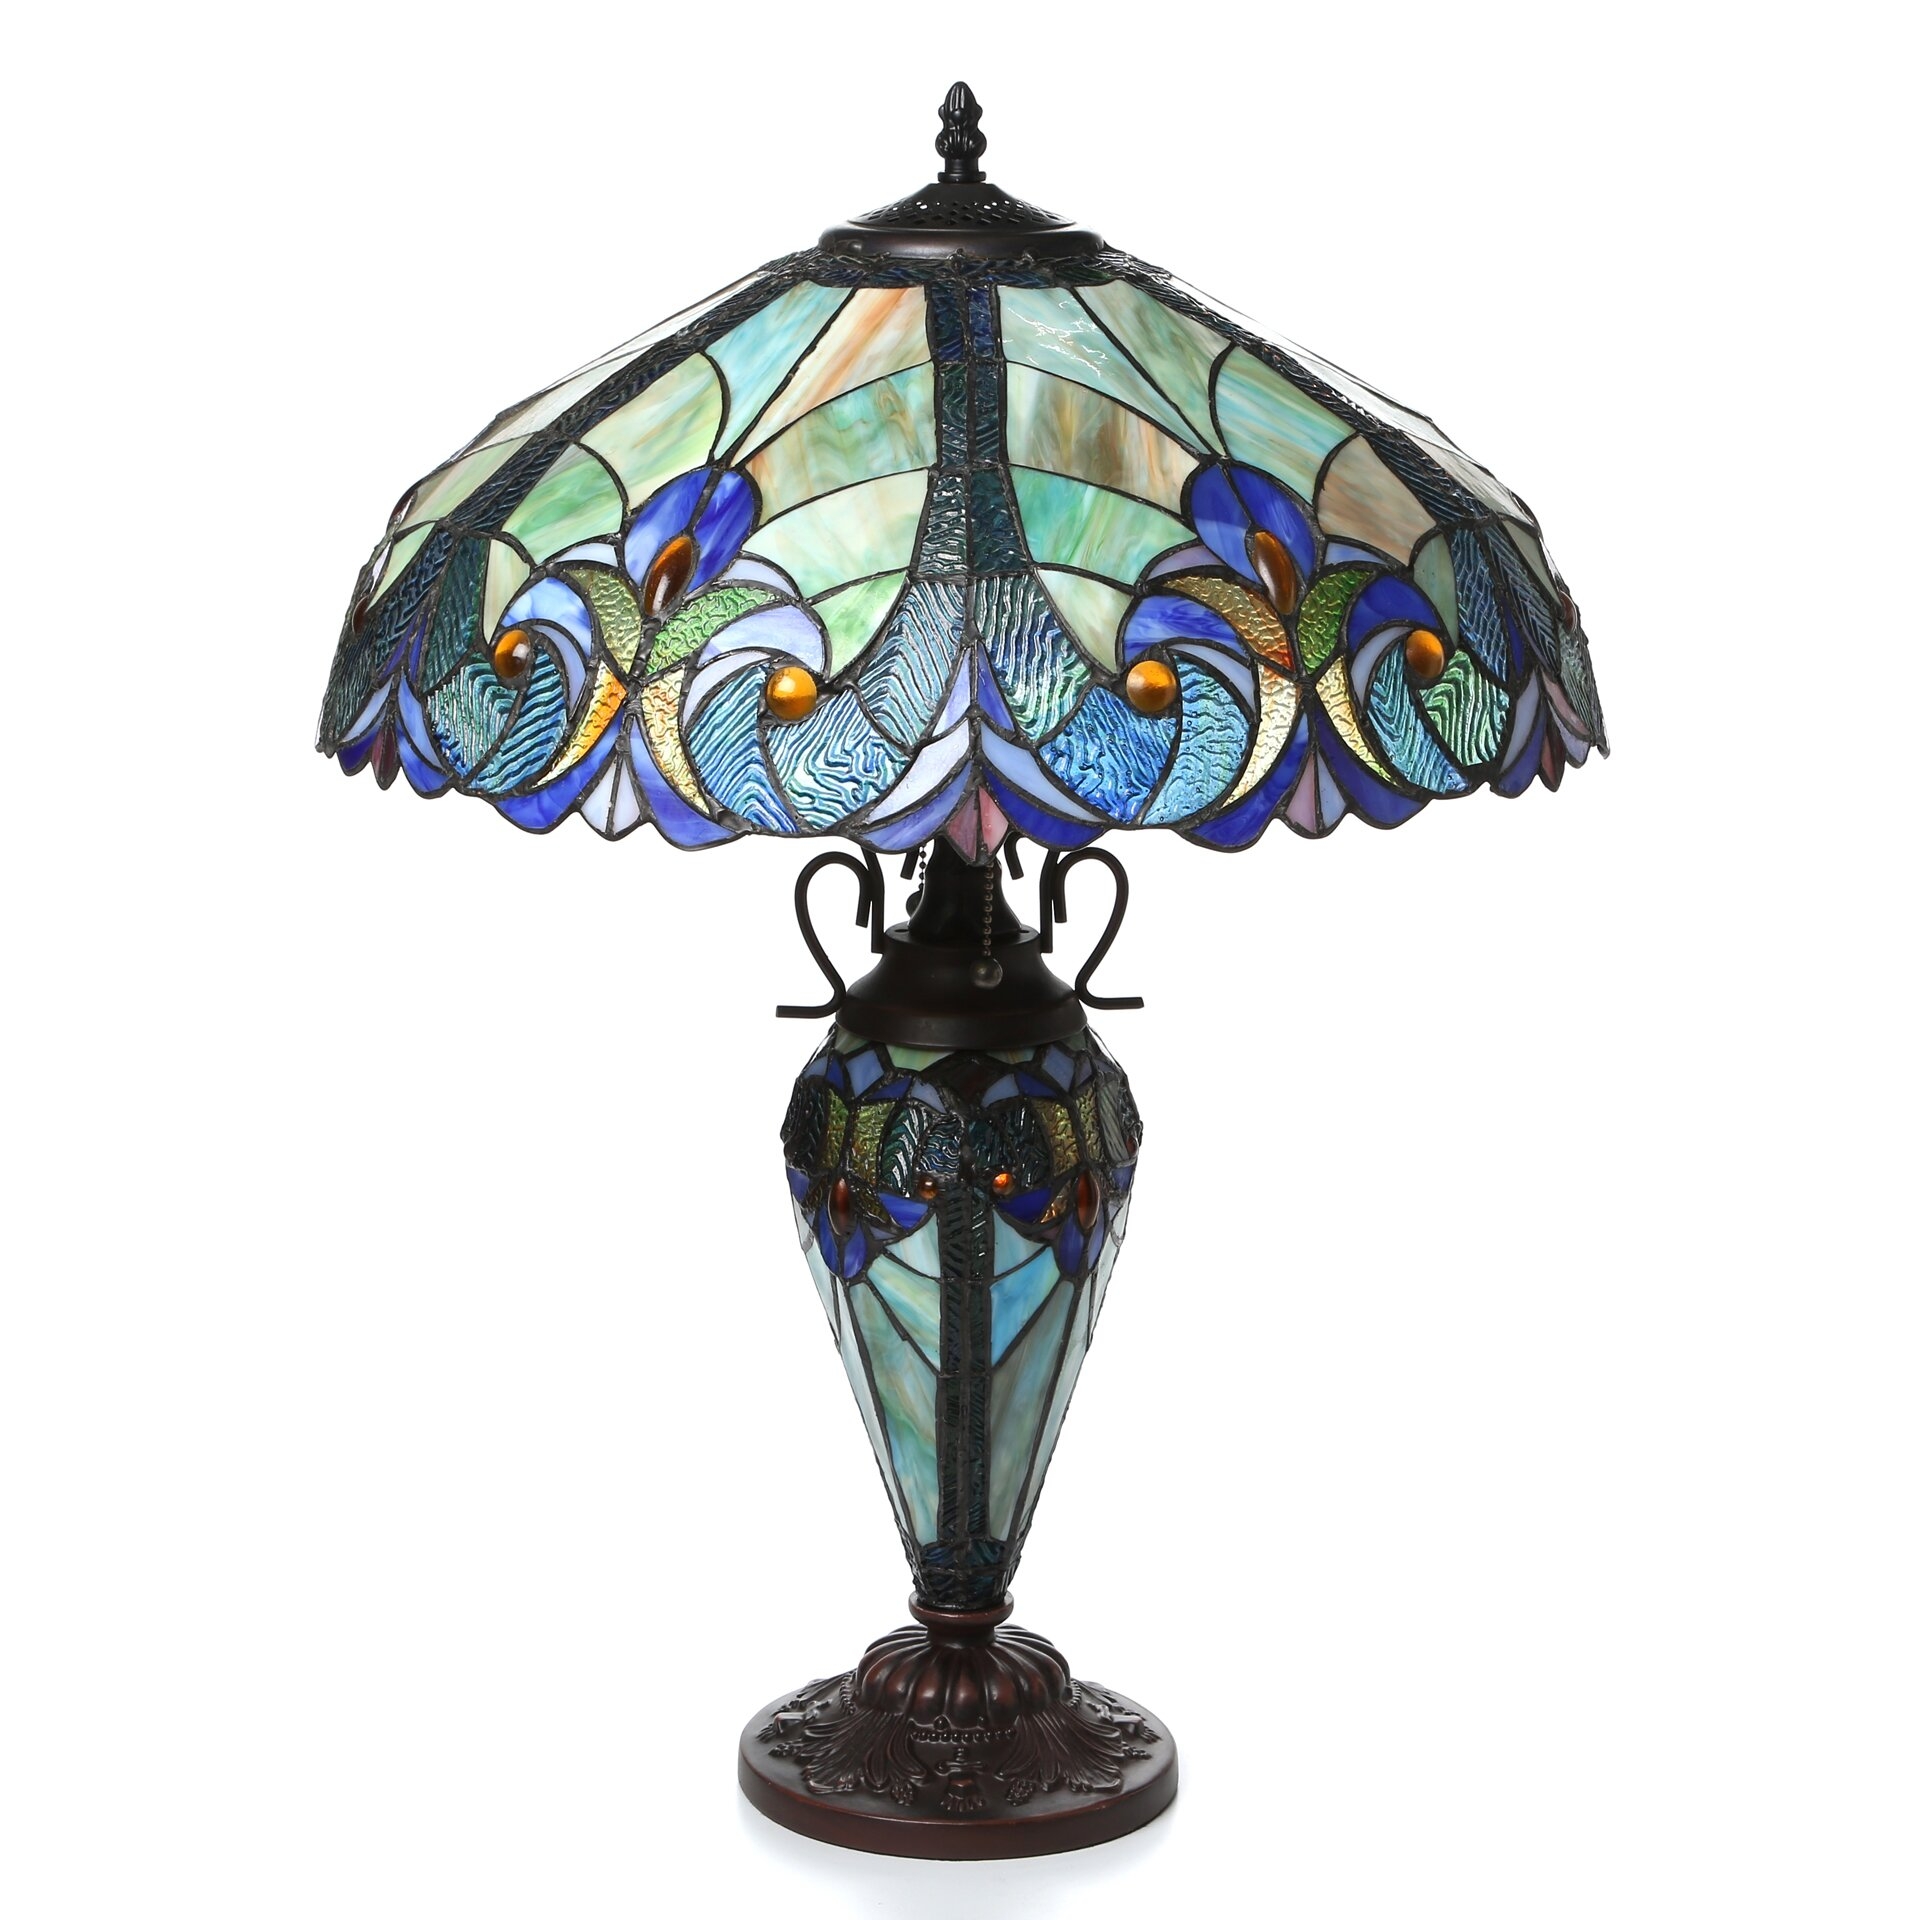 Tiffany Roosevelt Victorian 26" H Table Lamp with Bowl Shade.